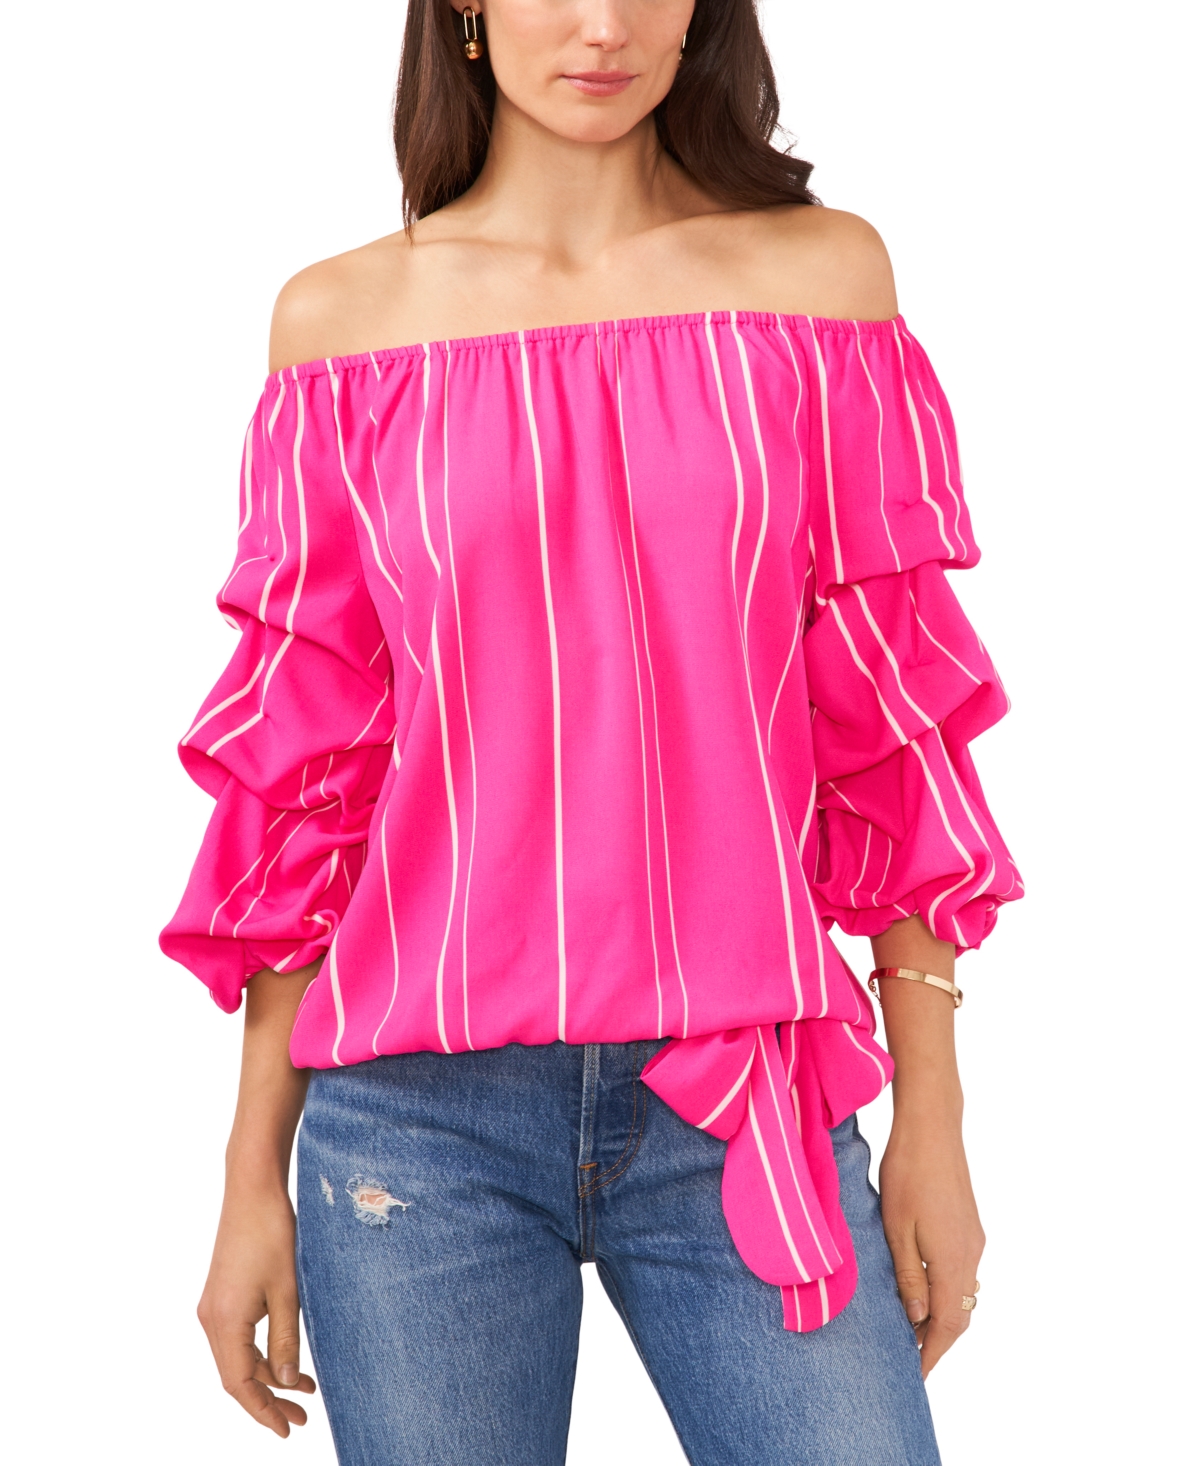 Women's Striped Off The Shoulder Bubble Sleeve Tie Front Blouse - Hot Pink